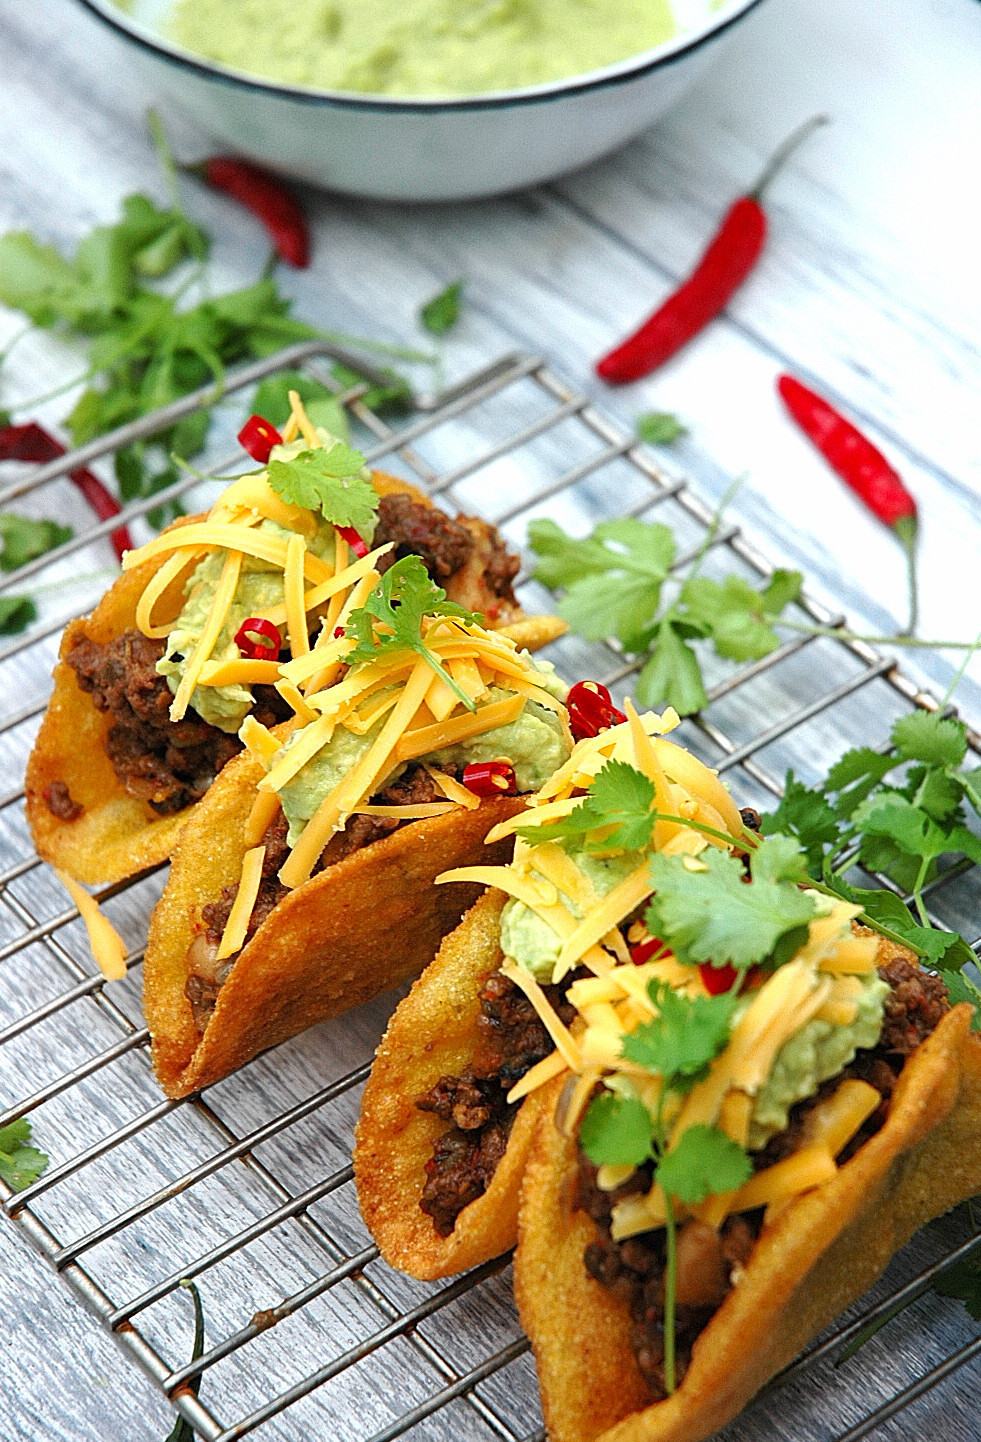 Authentic Mexican Ground Beef Taco Recipe
 Beef Tacos – I think I’m beginning to like Mexican Food